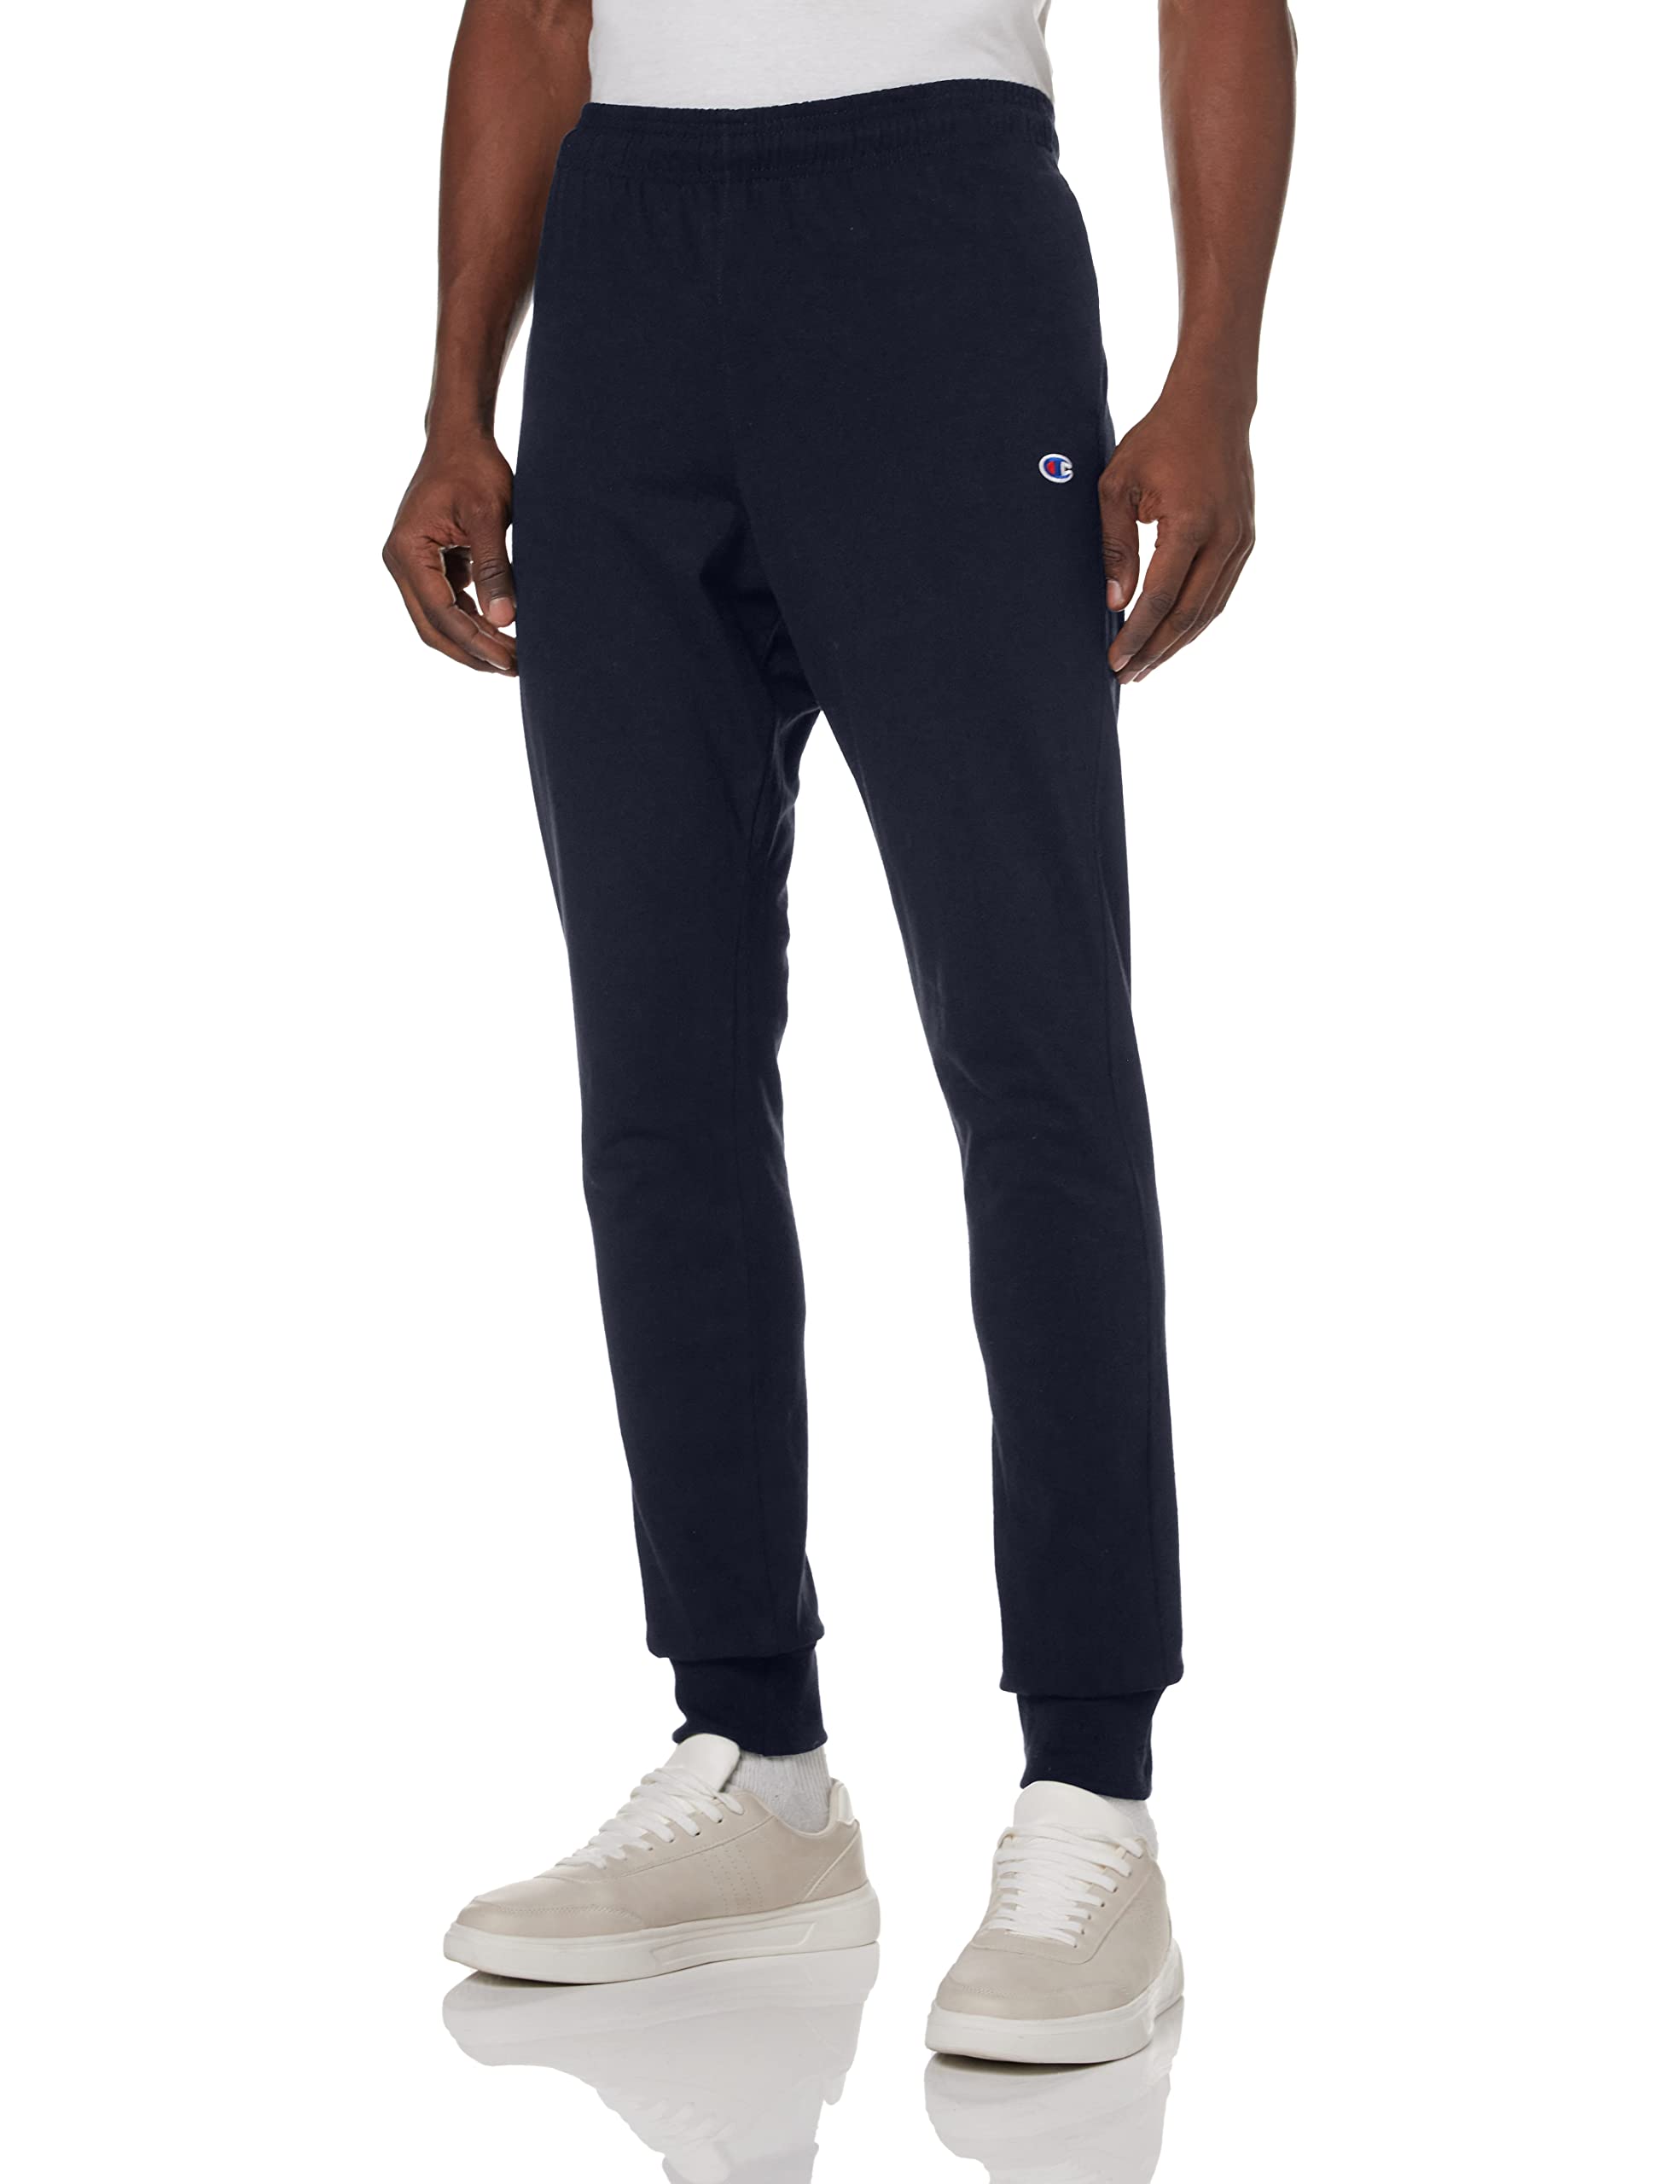 Champion Men's Joggers, Everyday Joggers, Lightweight, Comfortable Joggers for Men, 31